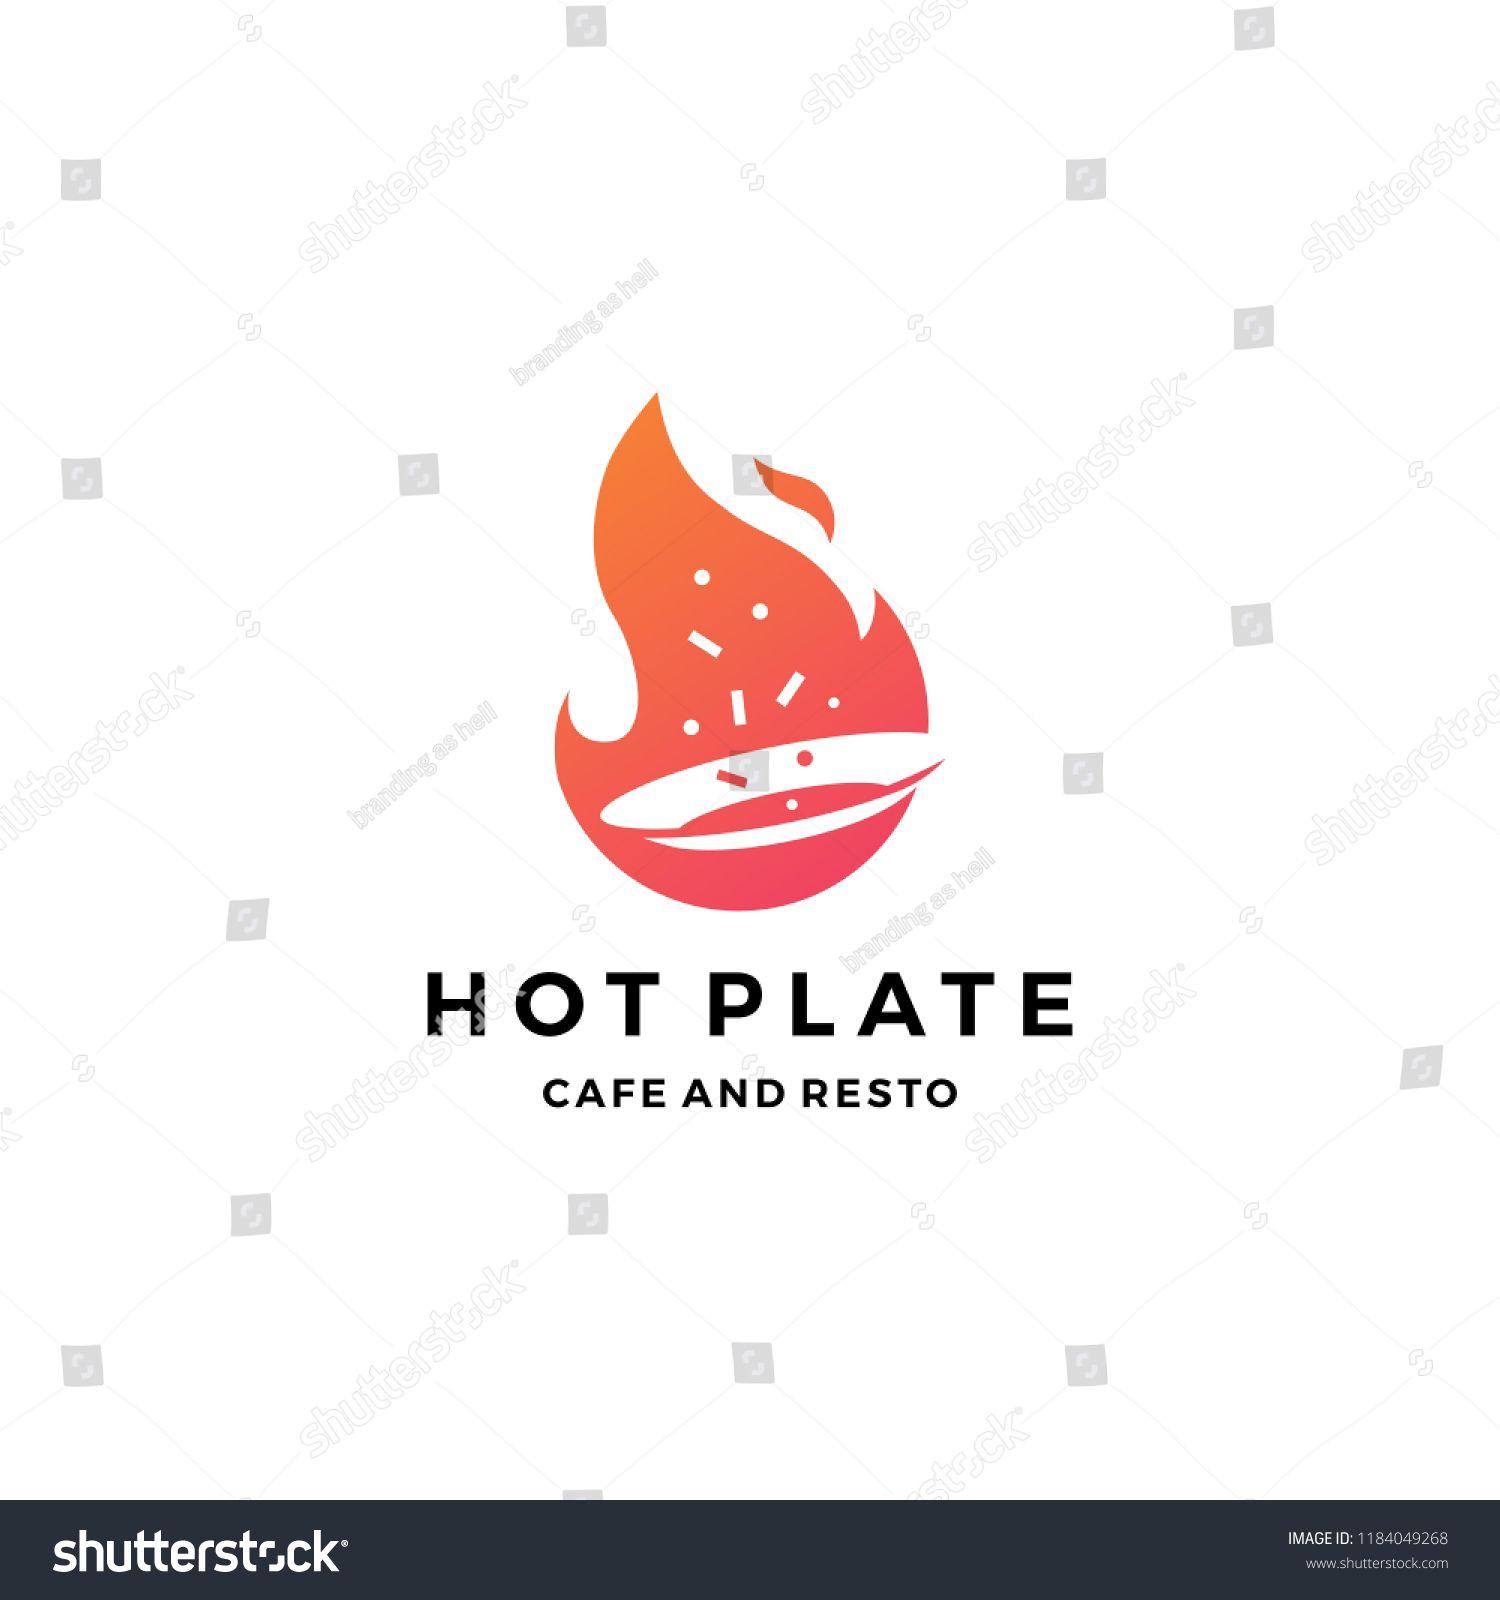 Flame Orange with Black Logo - fire flame hot plate logo icon #plate, #hot, #cooking, #food